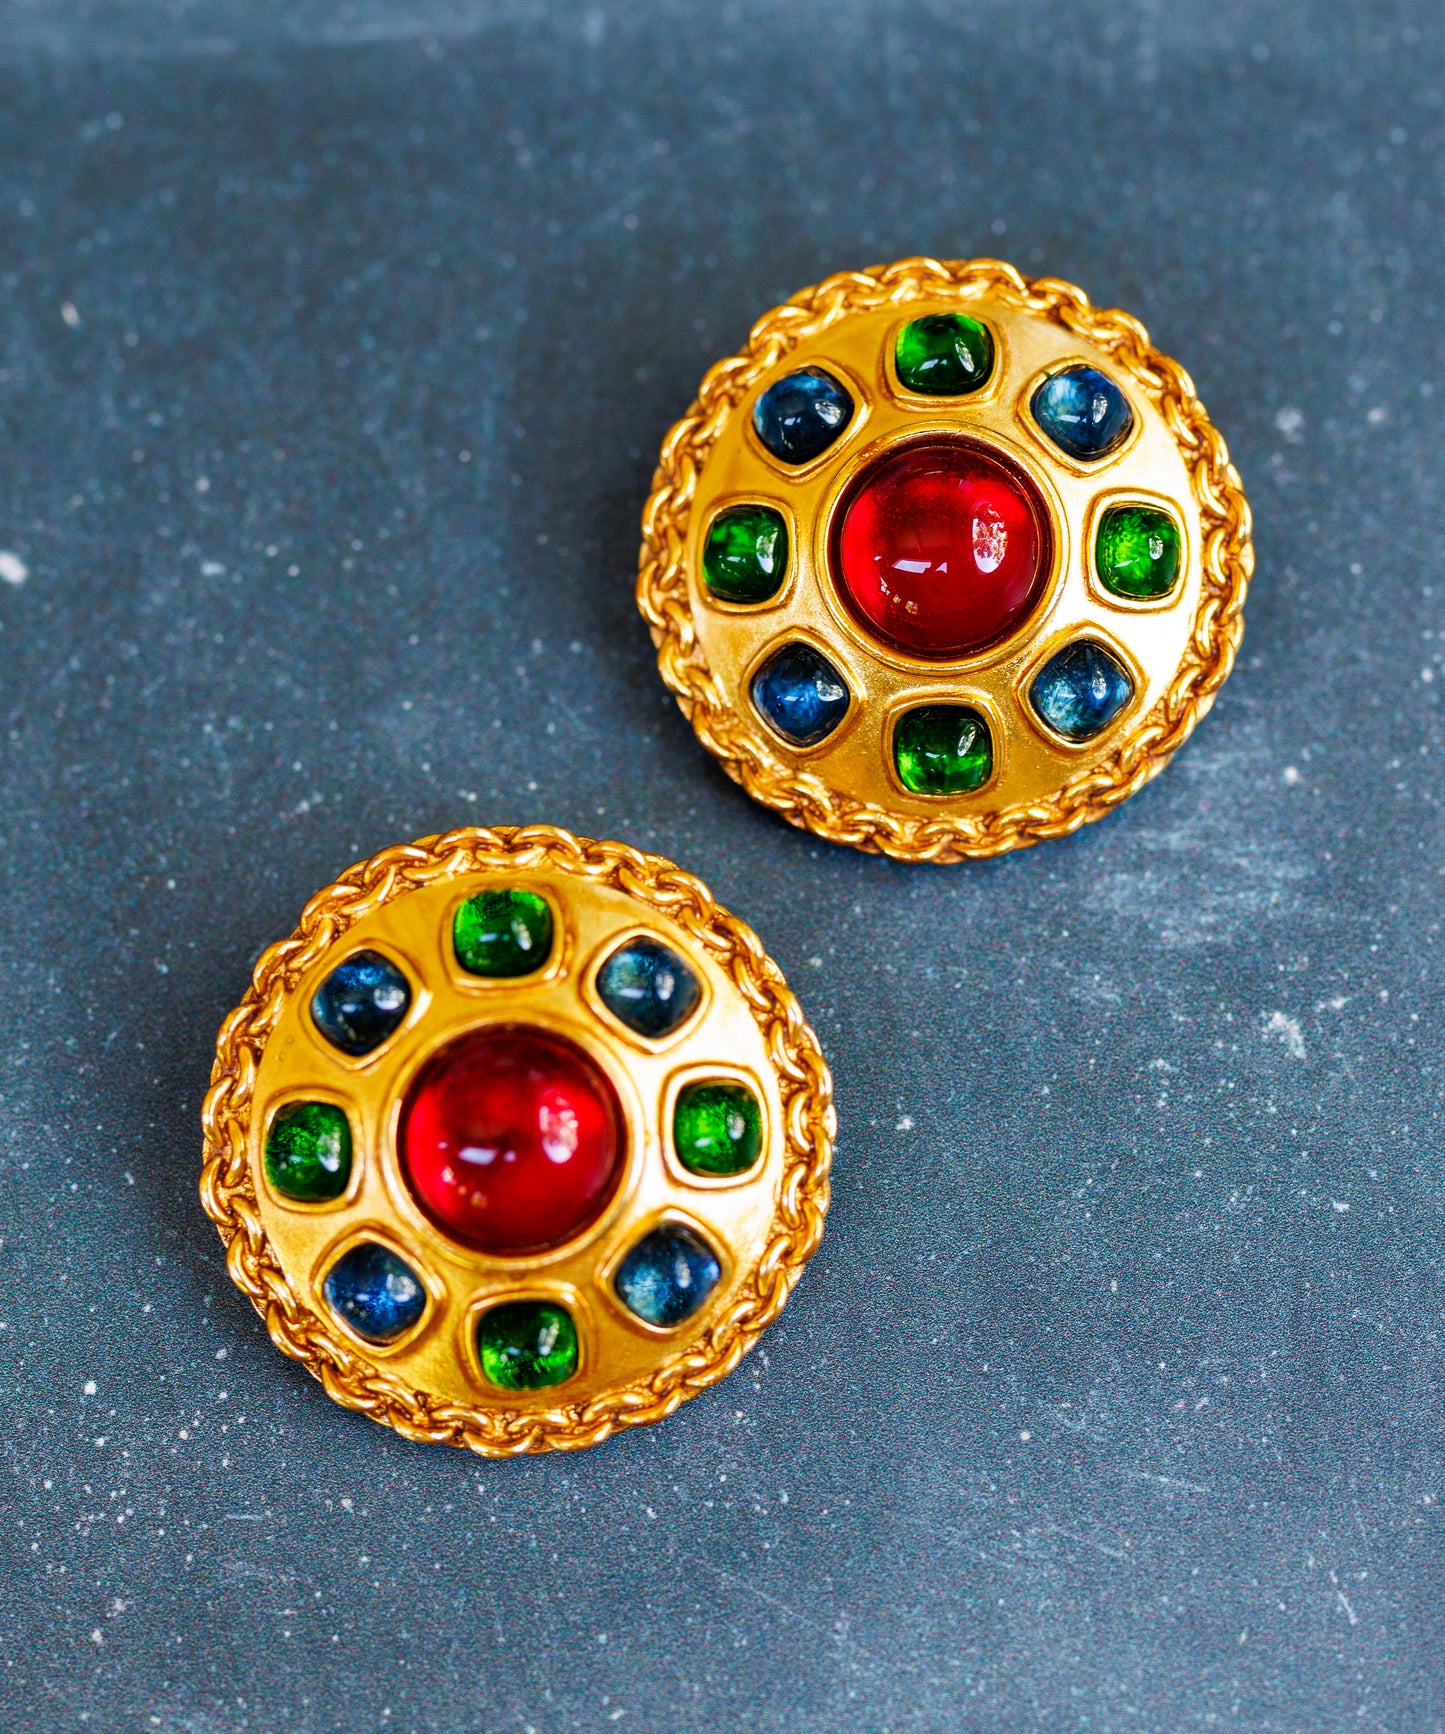 Vintage Carlisle Massive Clip On Earrings with Colorful Cabochon Stones